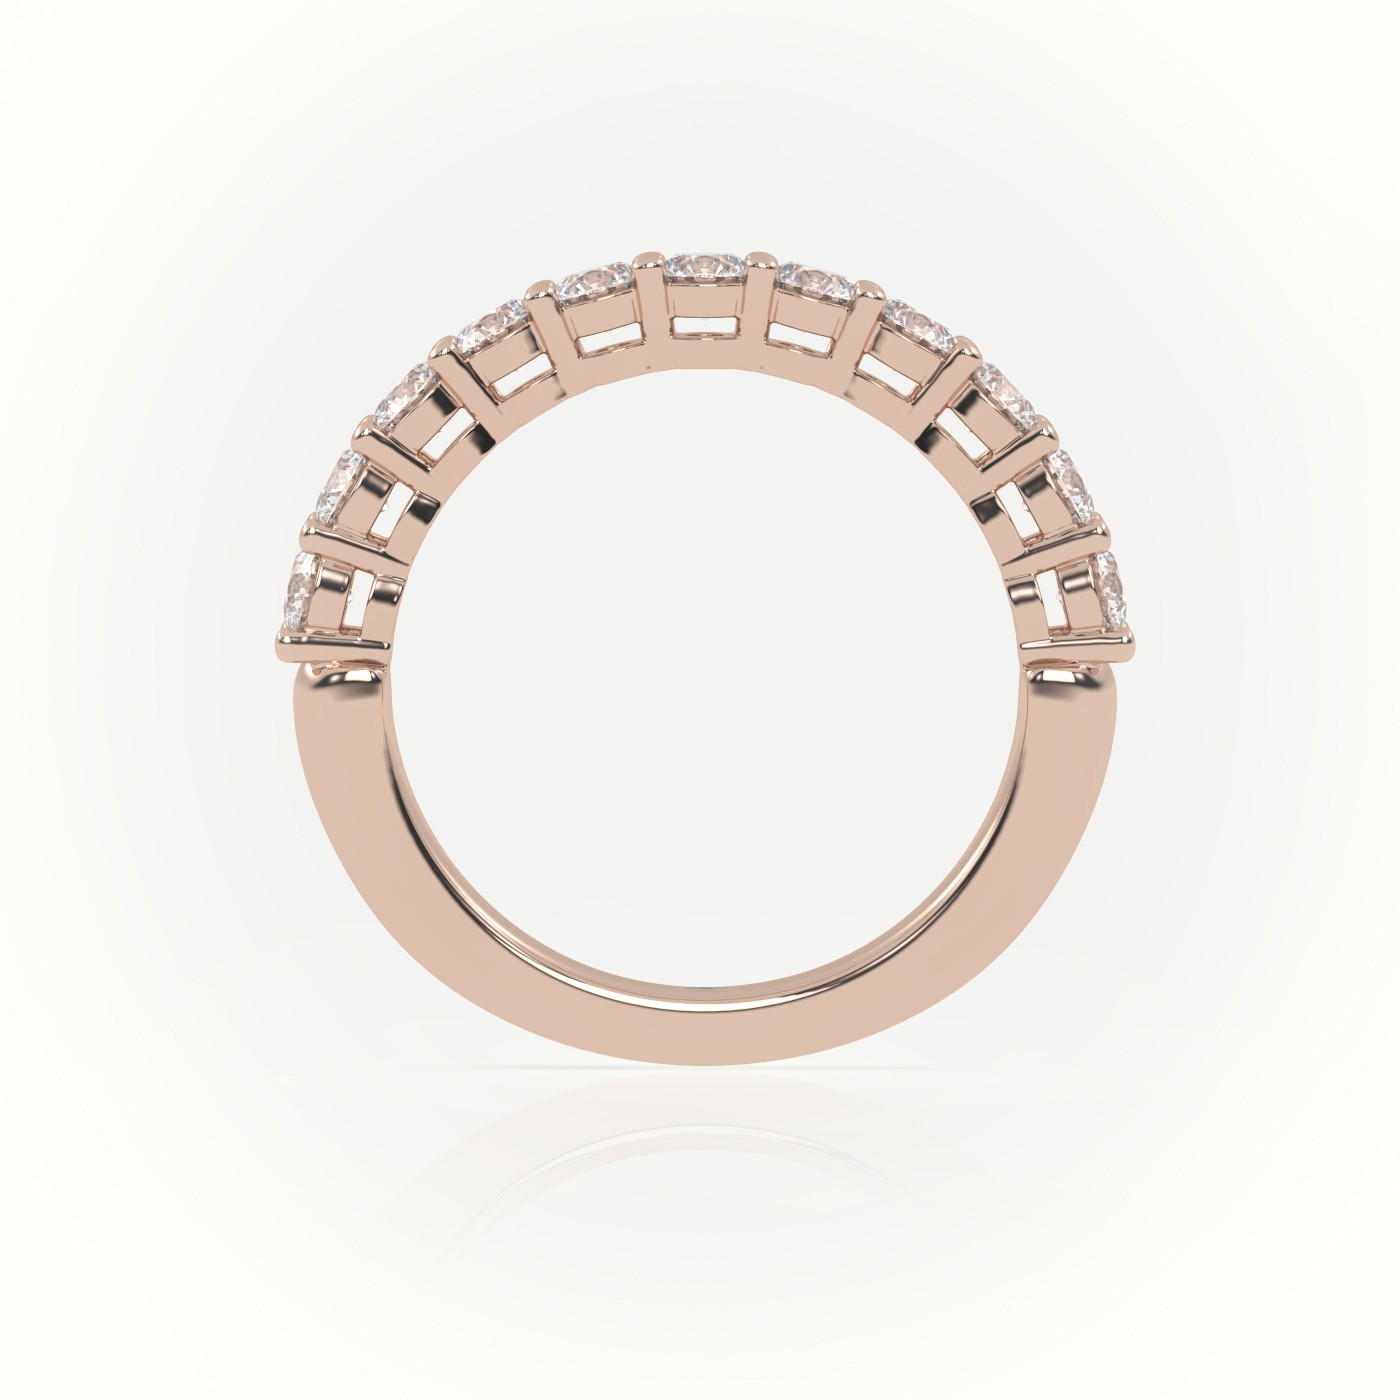 18k rose gold  round cut diamonds shared prongs scallop setting half eternity wedding bands Photos & images